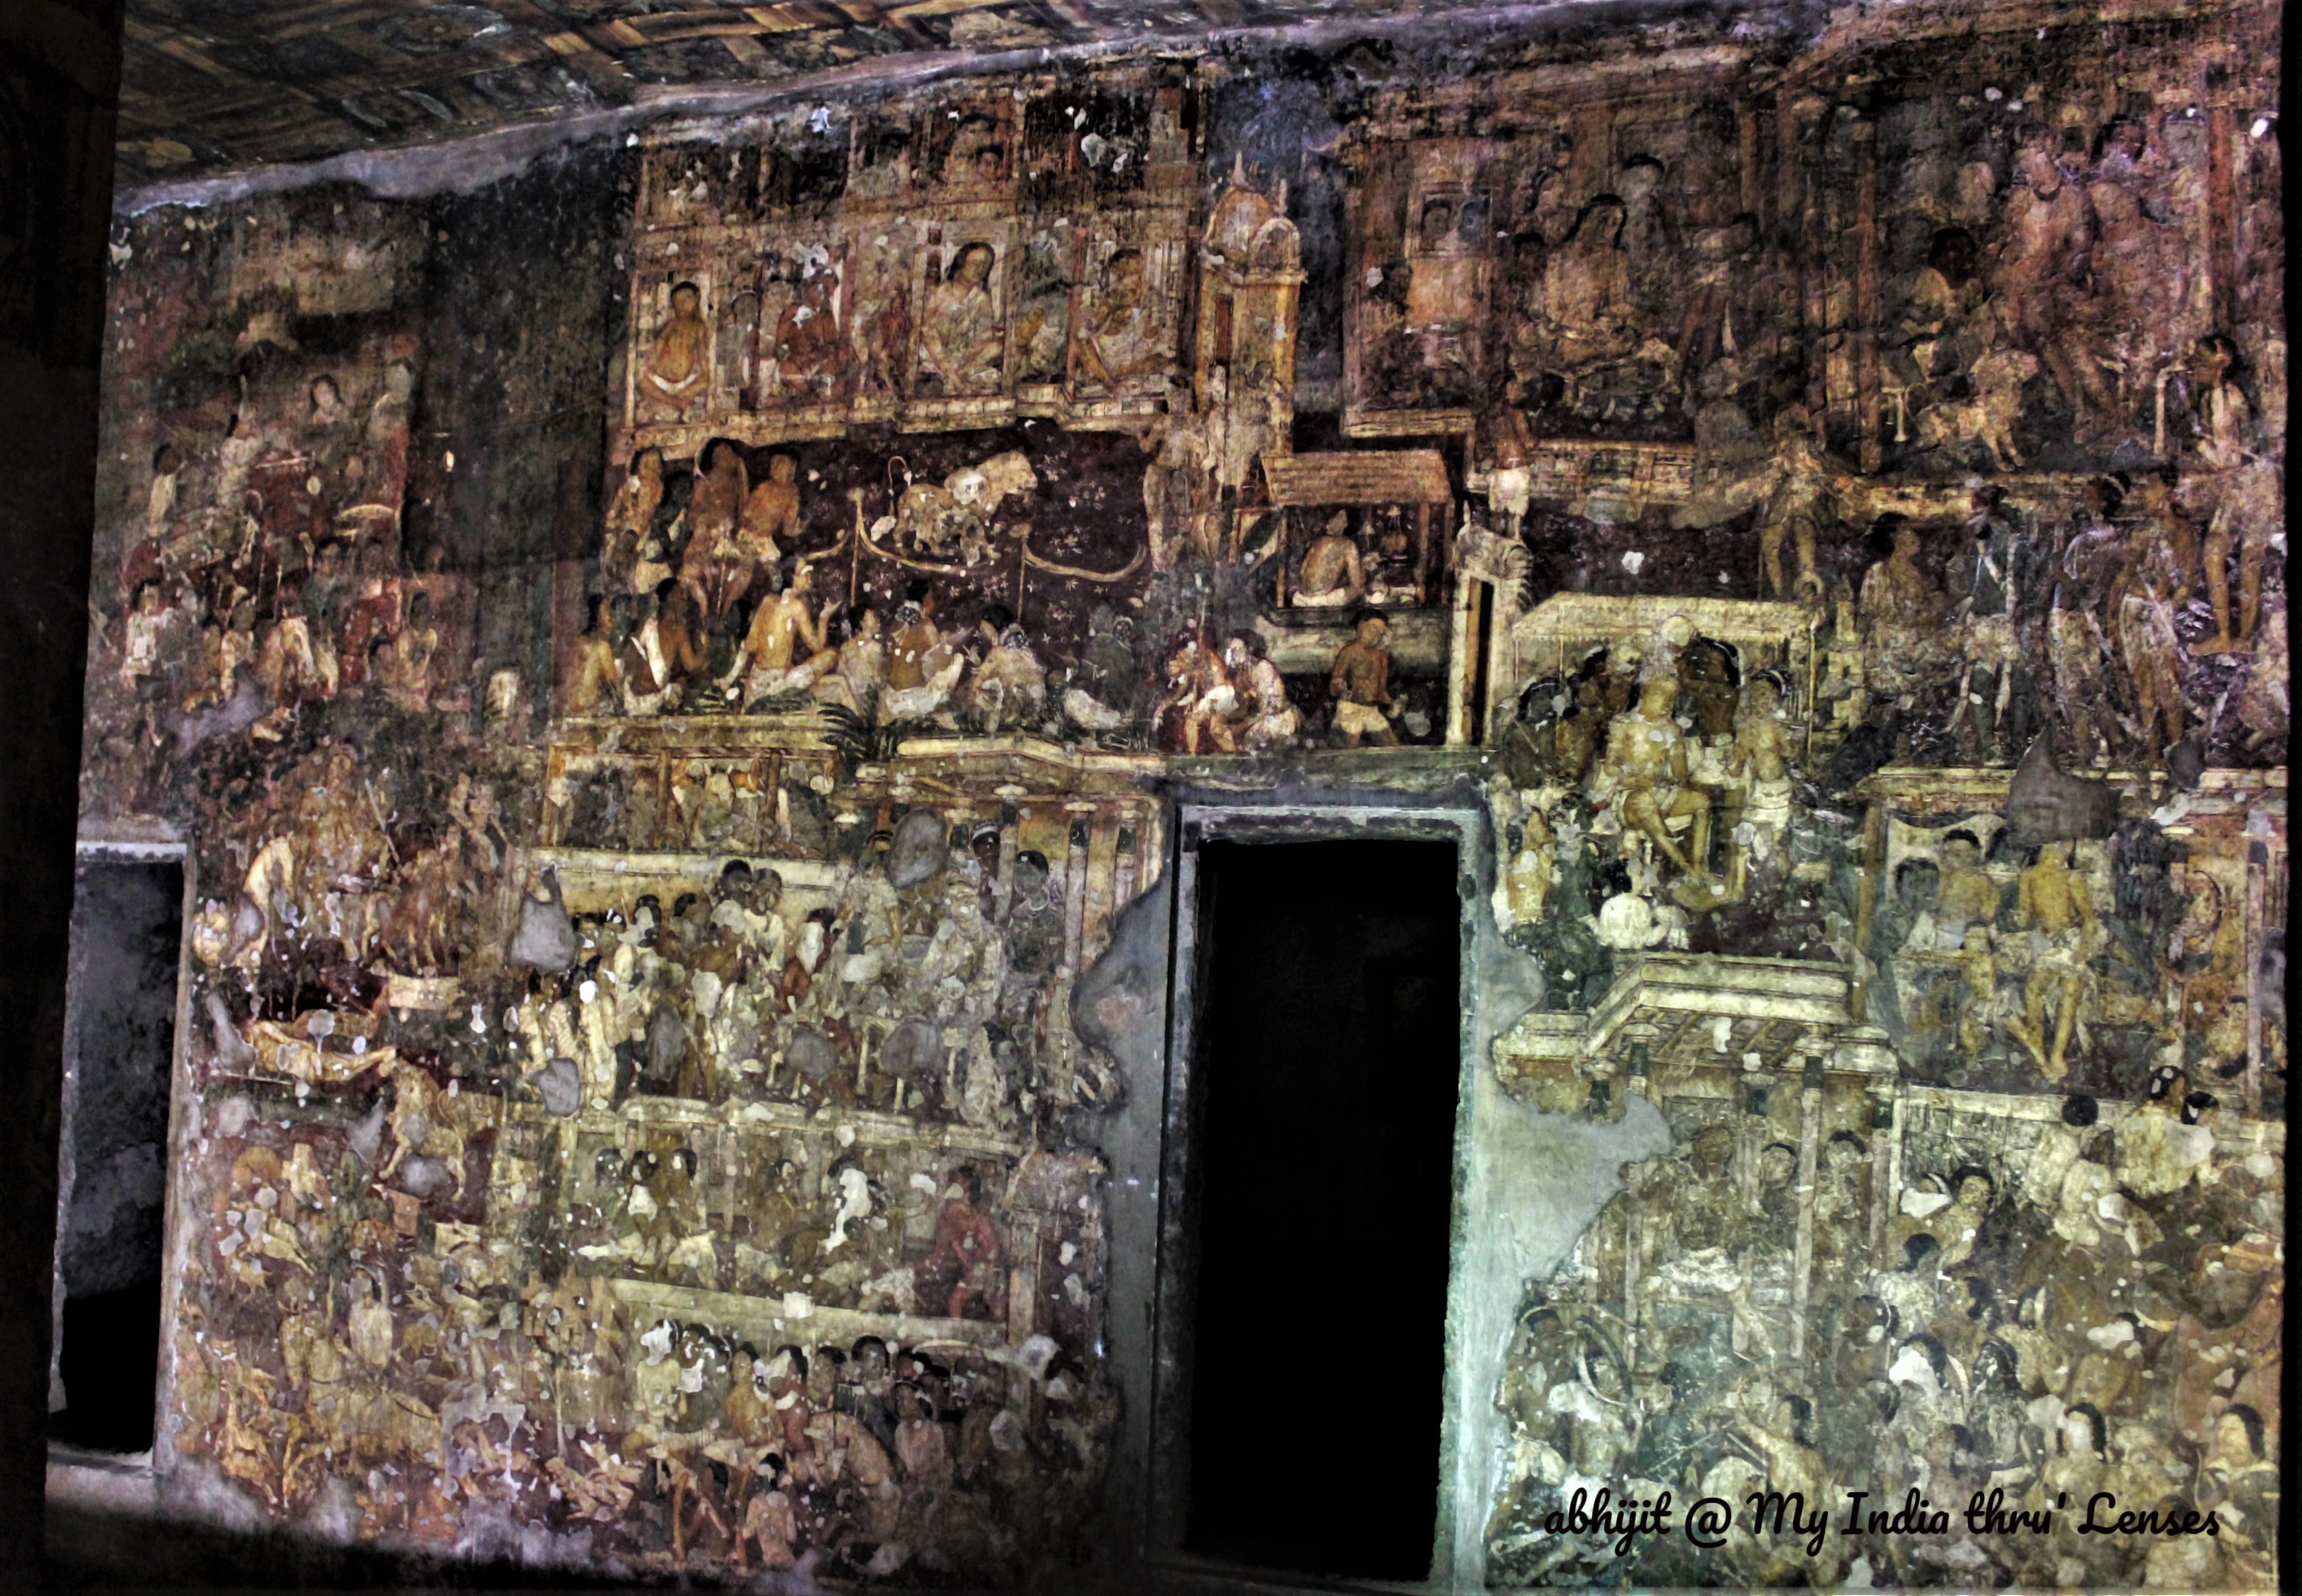 Murals on the walls, pillars and ceiling of Cave 17